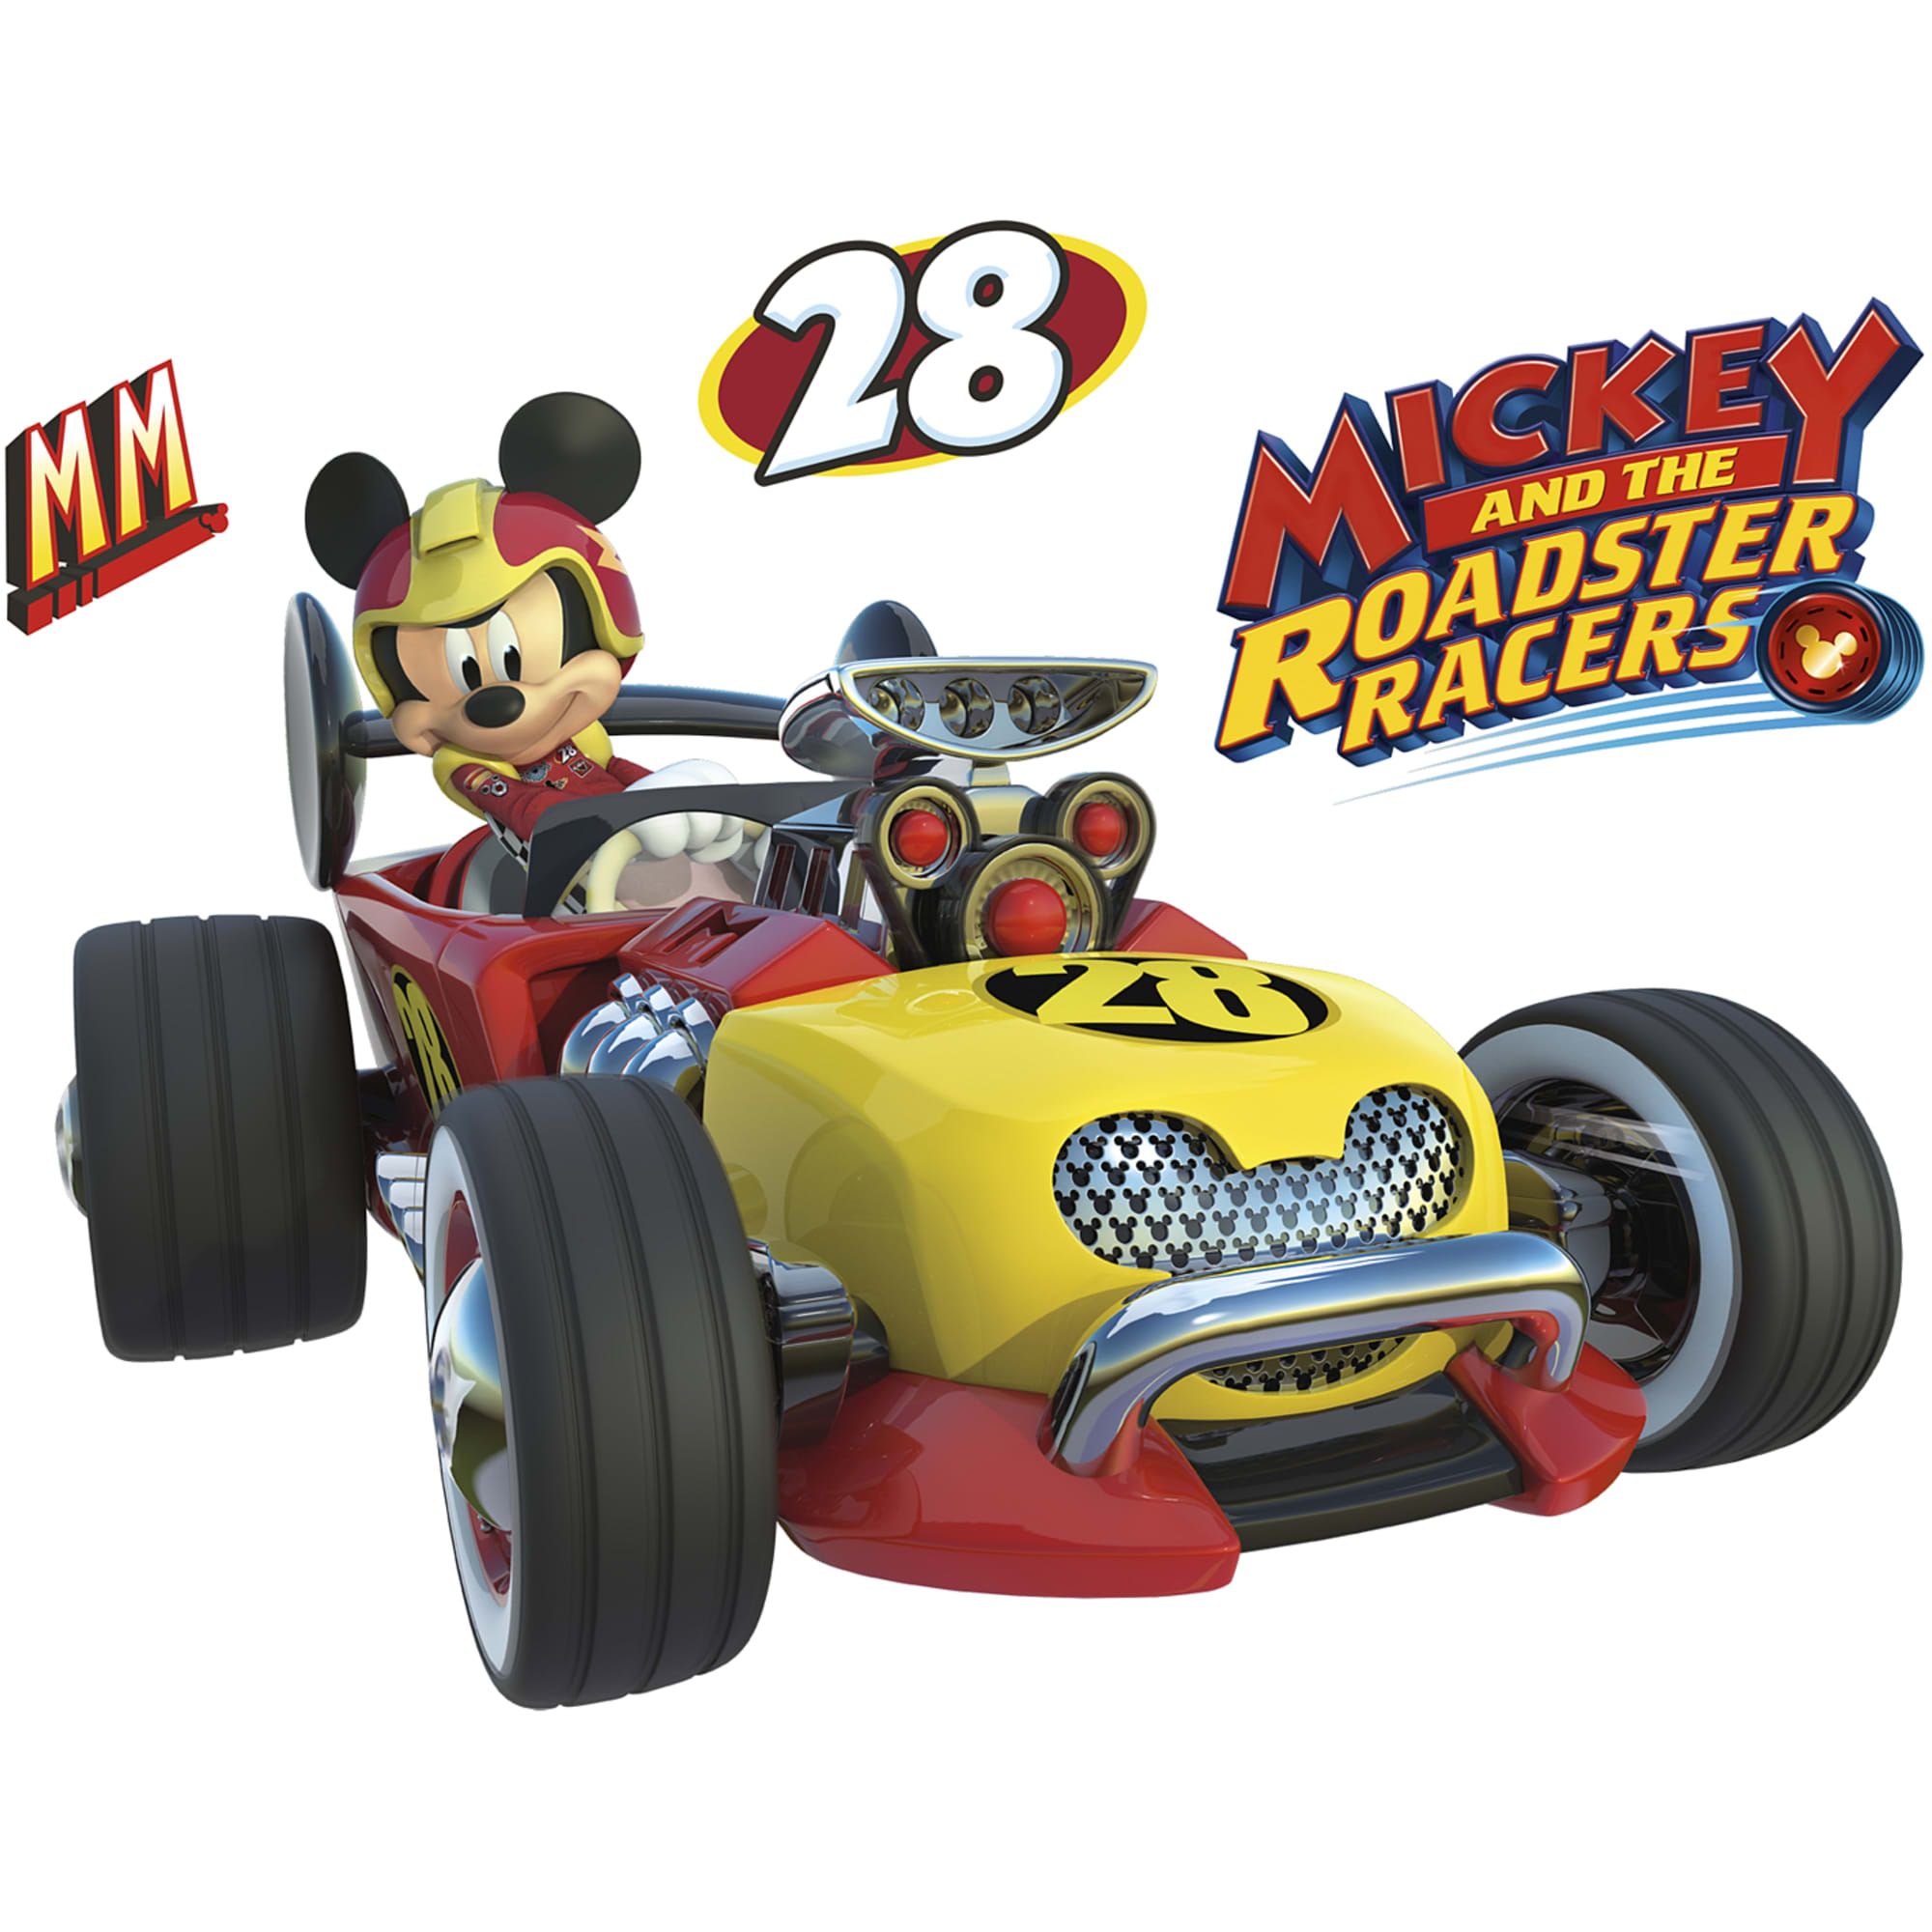 Mickey roadster racers ideas. mickey roadster racers, mickey, mickey mouse